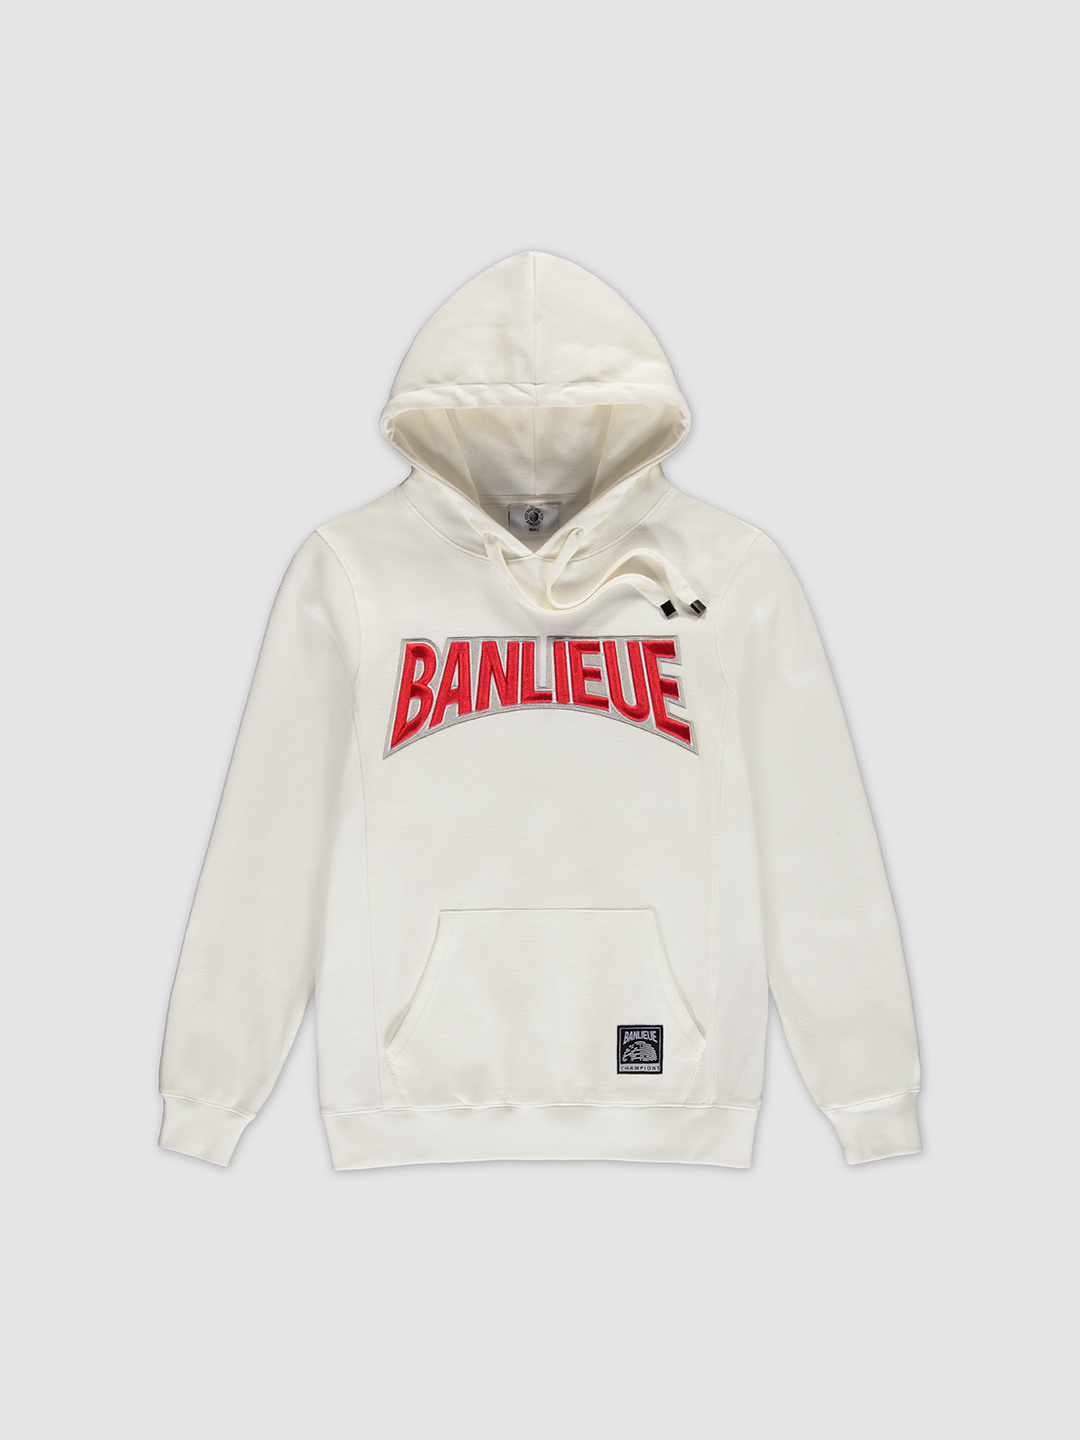 BANLIEUE | Champion Hoodie White - Clan 